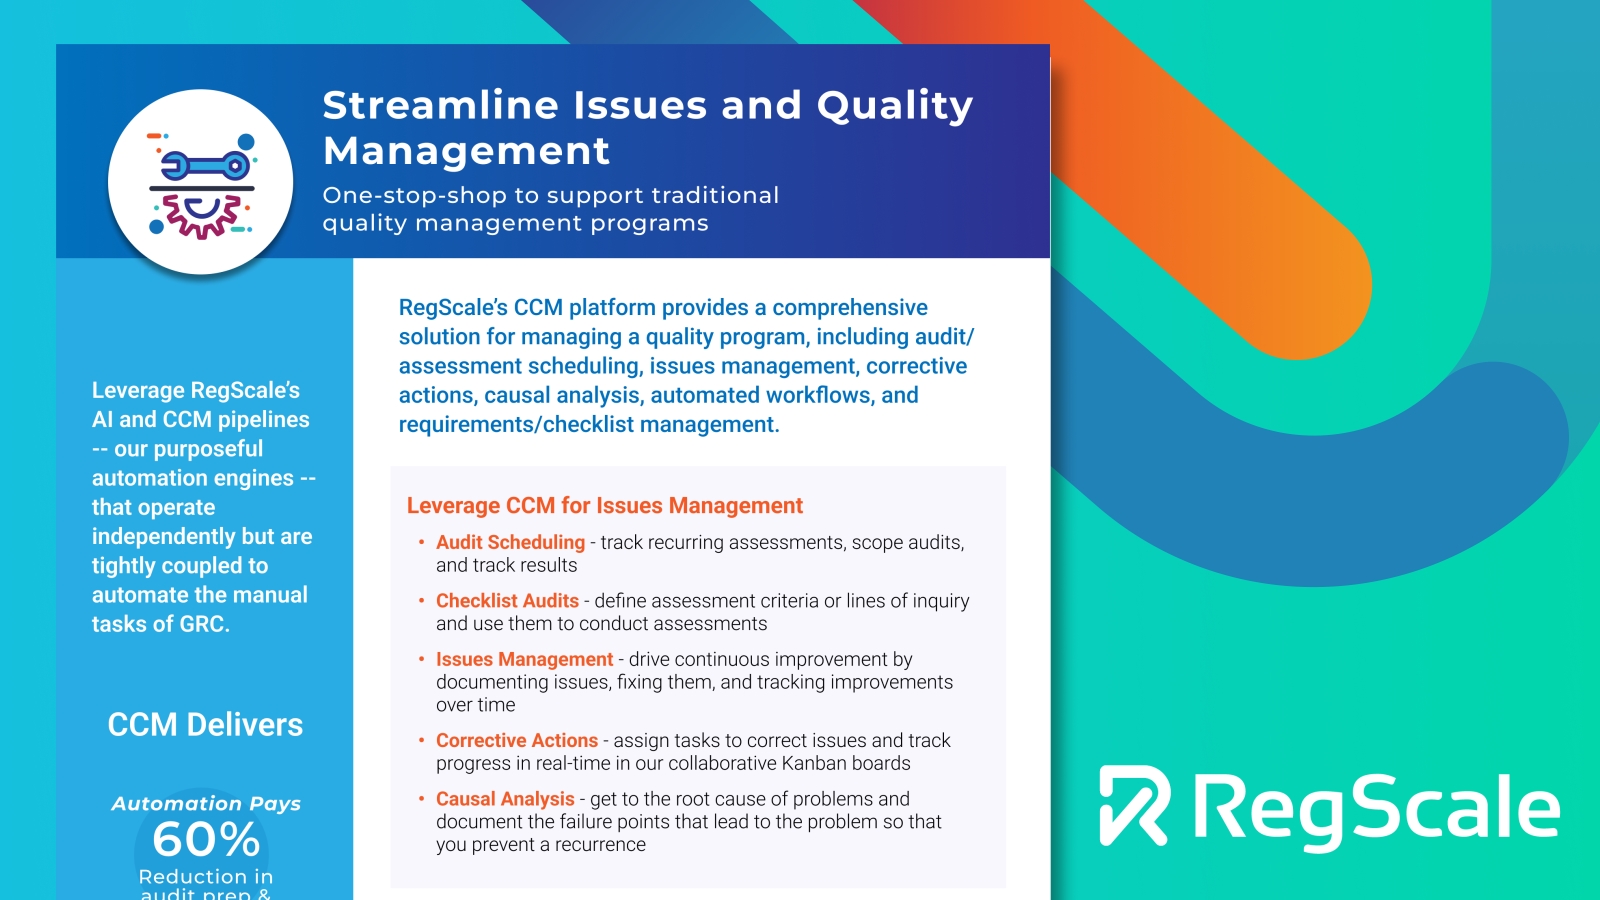 Streamline Issues and Quality Management